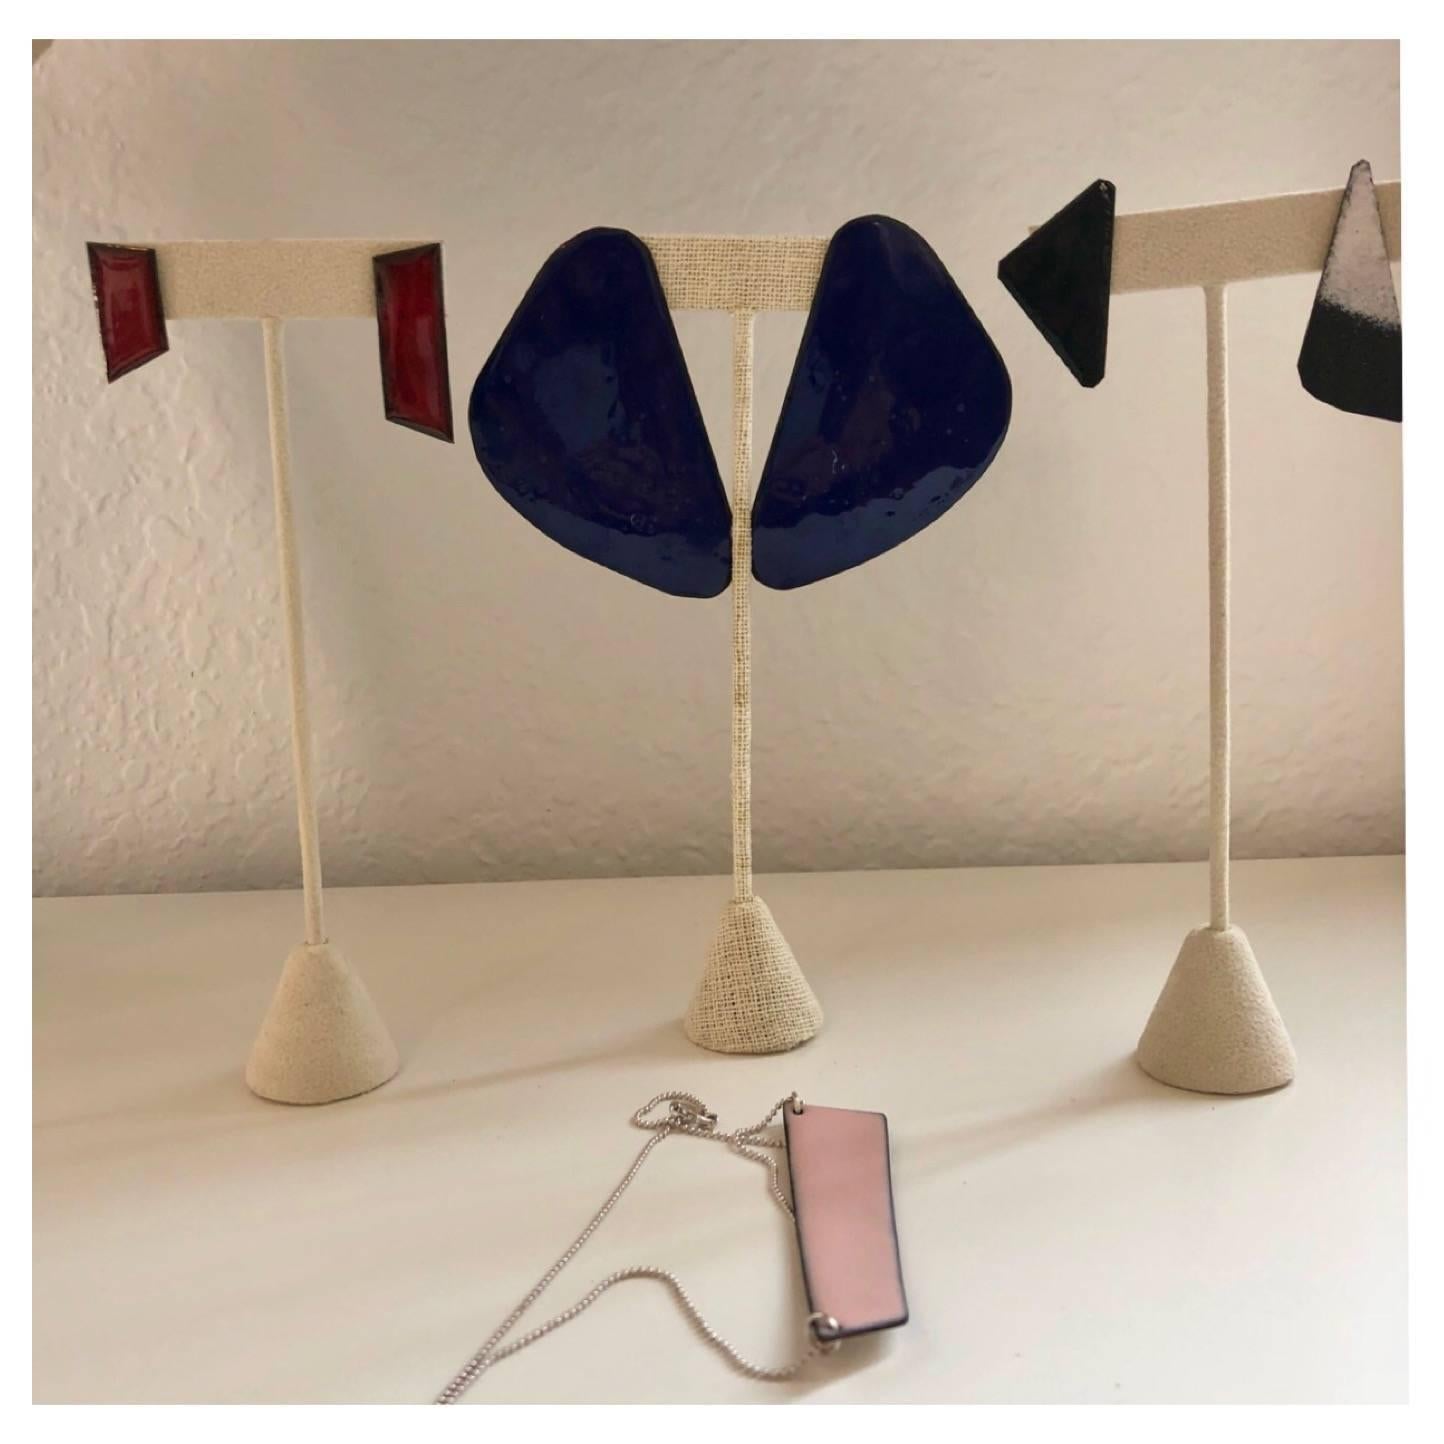  Michel McNabb for Basha Gold Black and White Enamel Triangle Earrings In New Condition For Sale In Boca Raton, FL